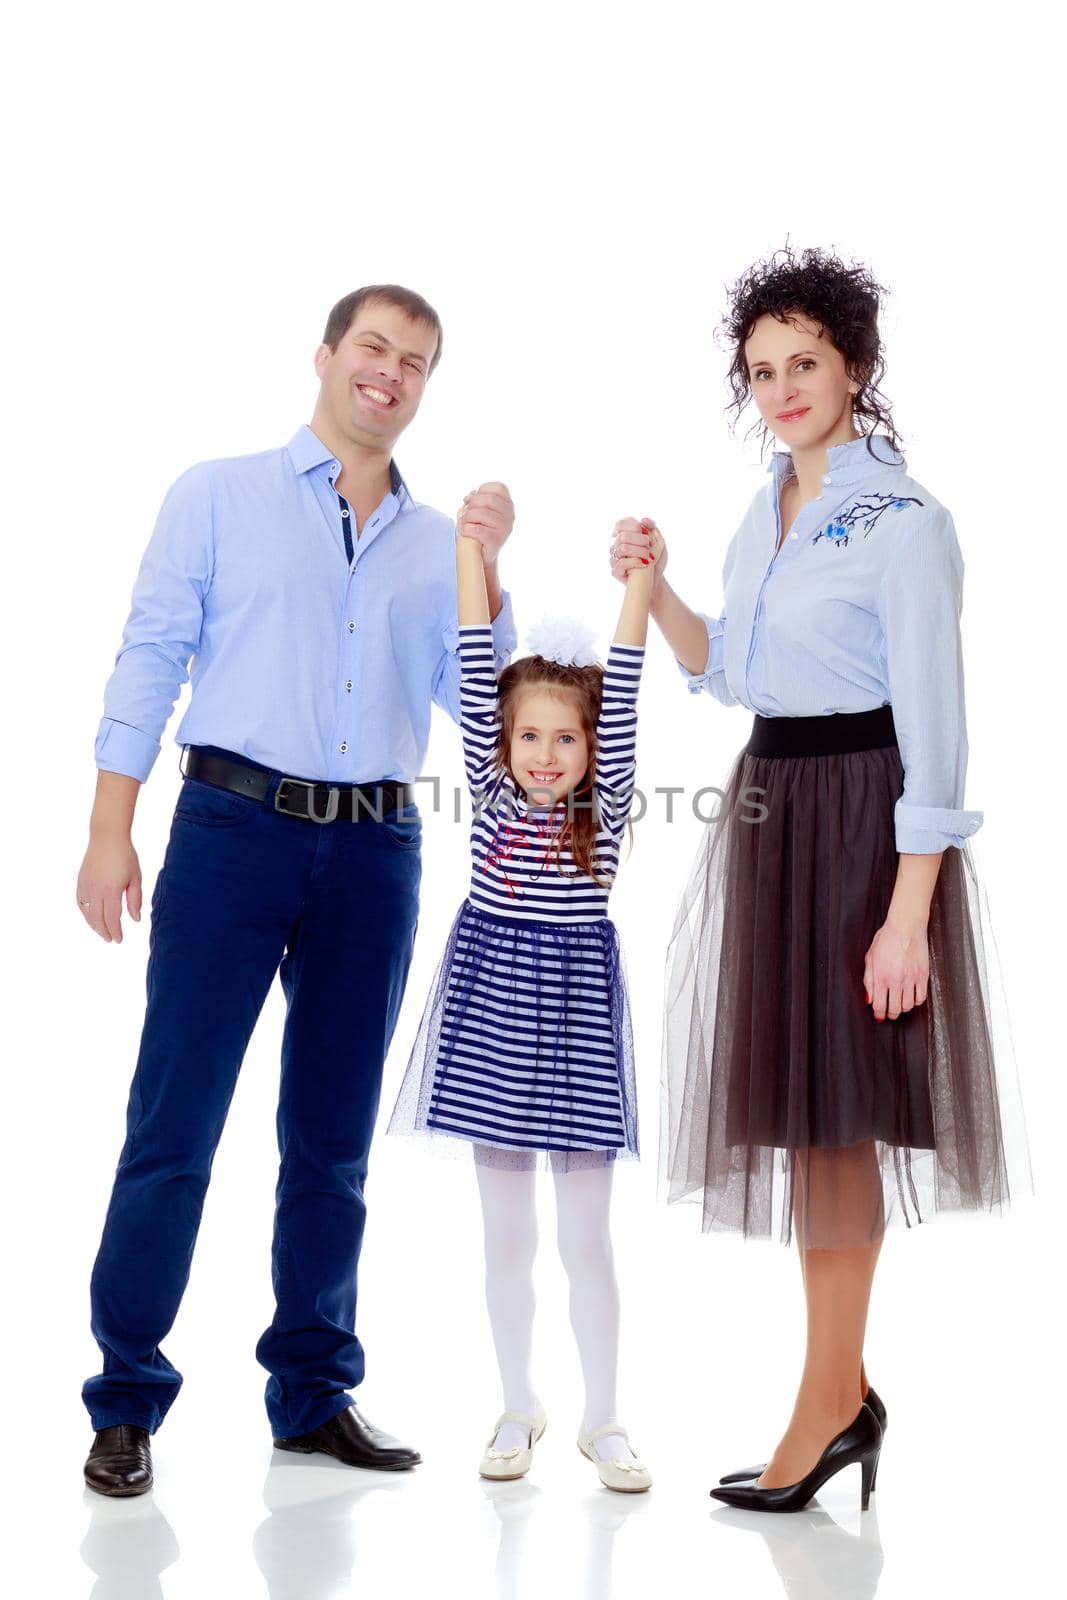 Happy young family, mom dad and little daughter.Parents raise the girl's hands.Isolated on white background.